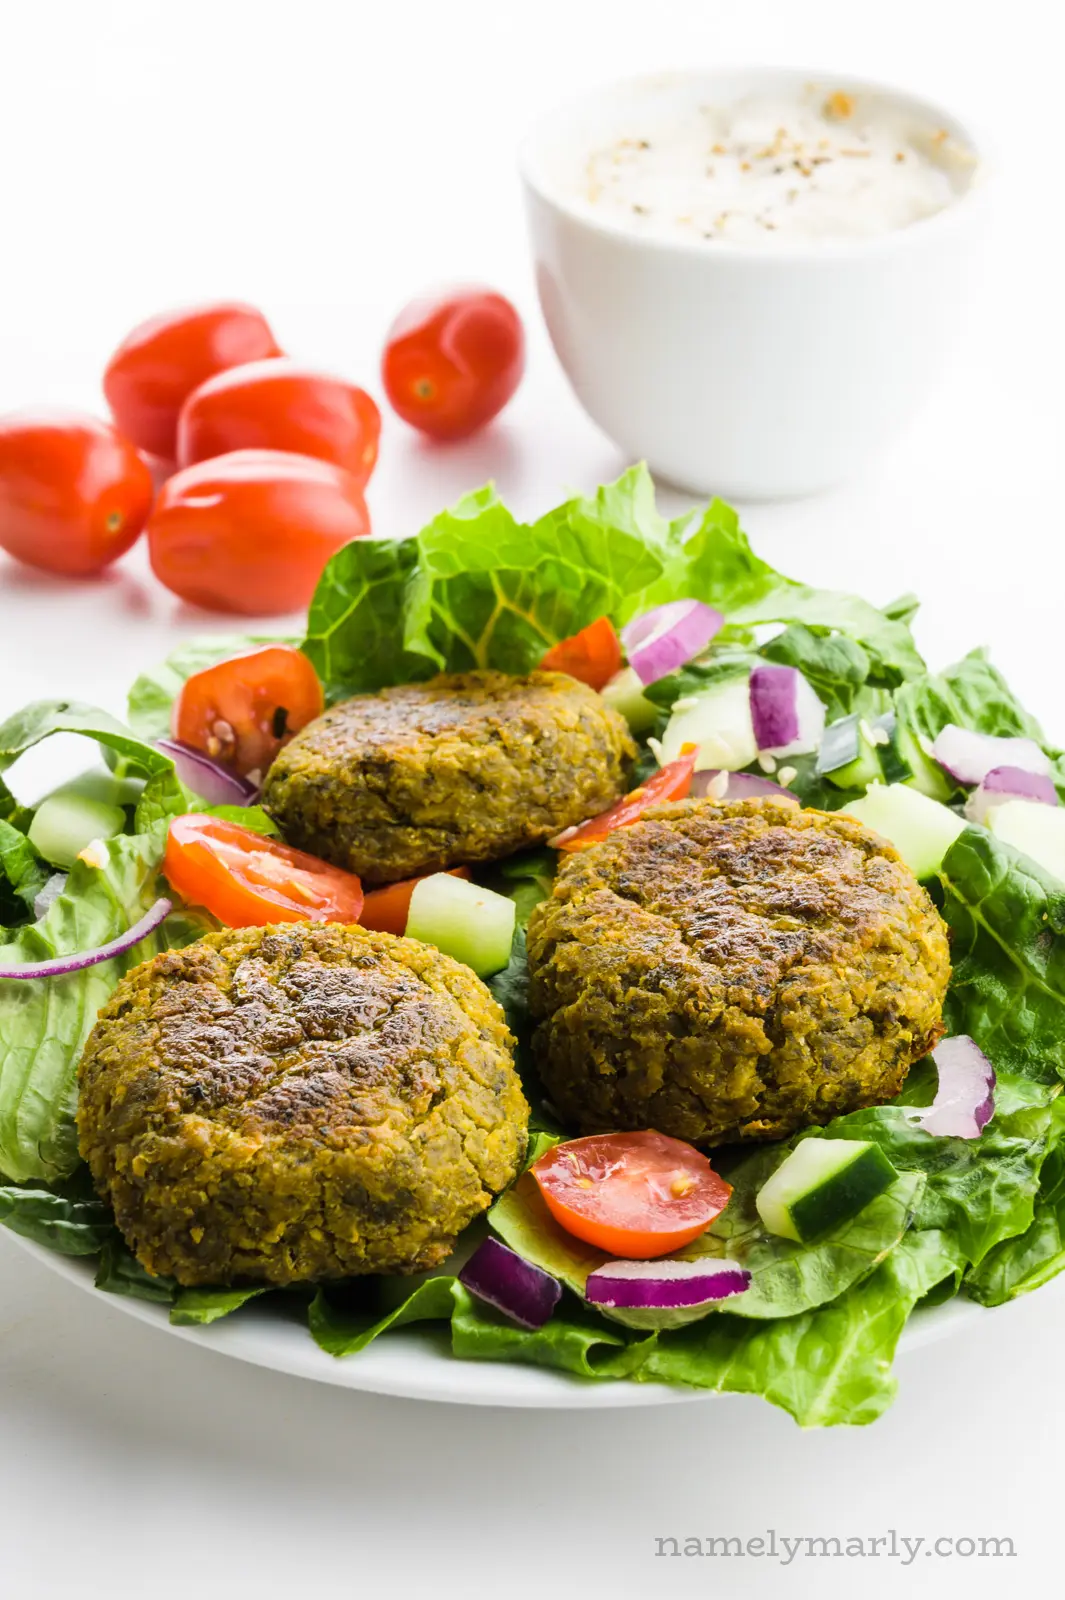 A salad is topped with baked falafel and tomatoes. There are more tomatoes behind it and a bowl full of tahini sauce.